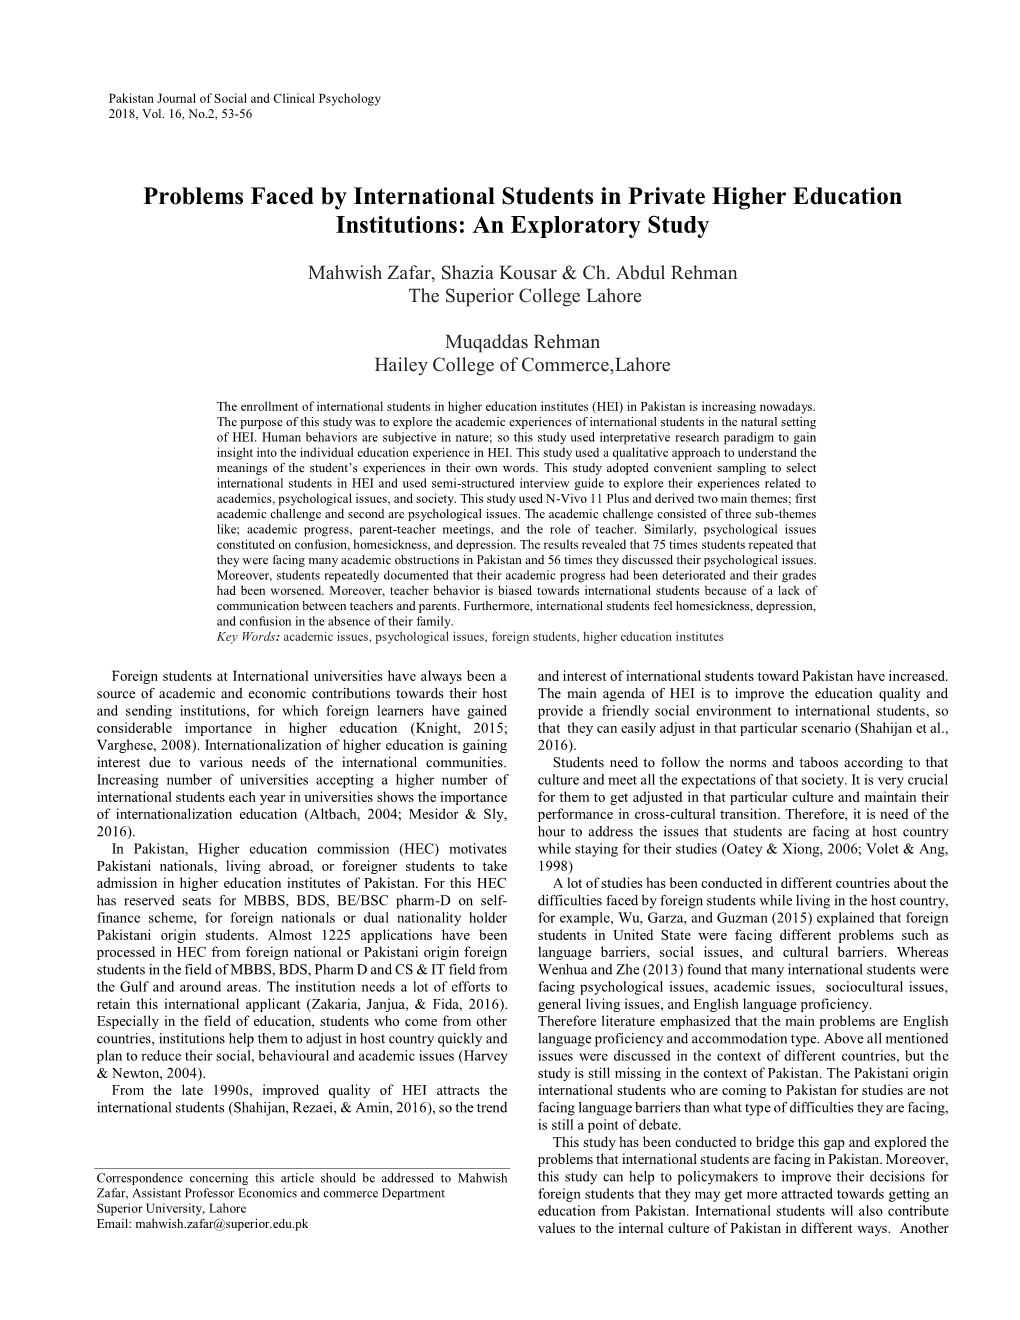 Problems Faced by Foreign Students in Private Higher Education Institutions